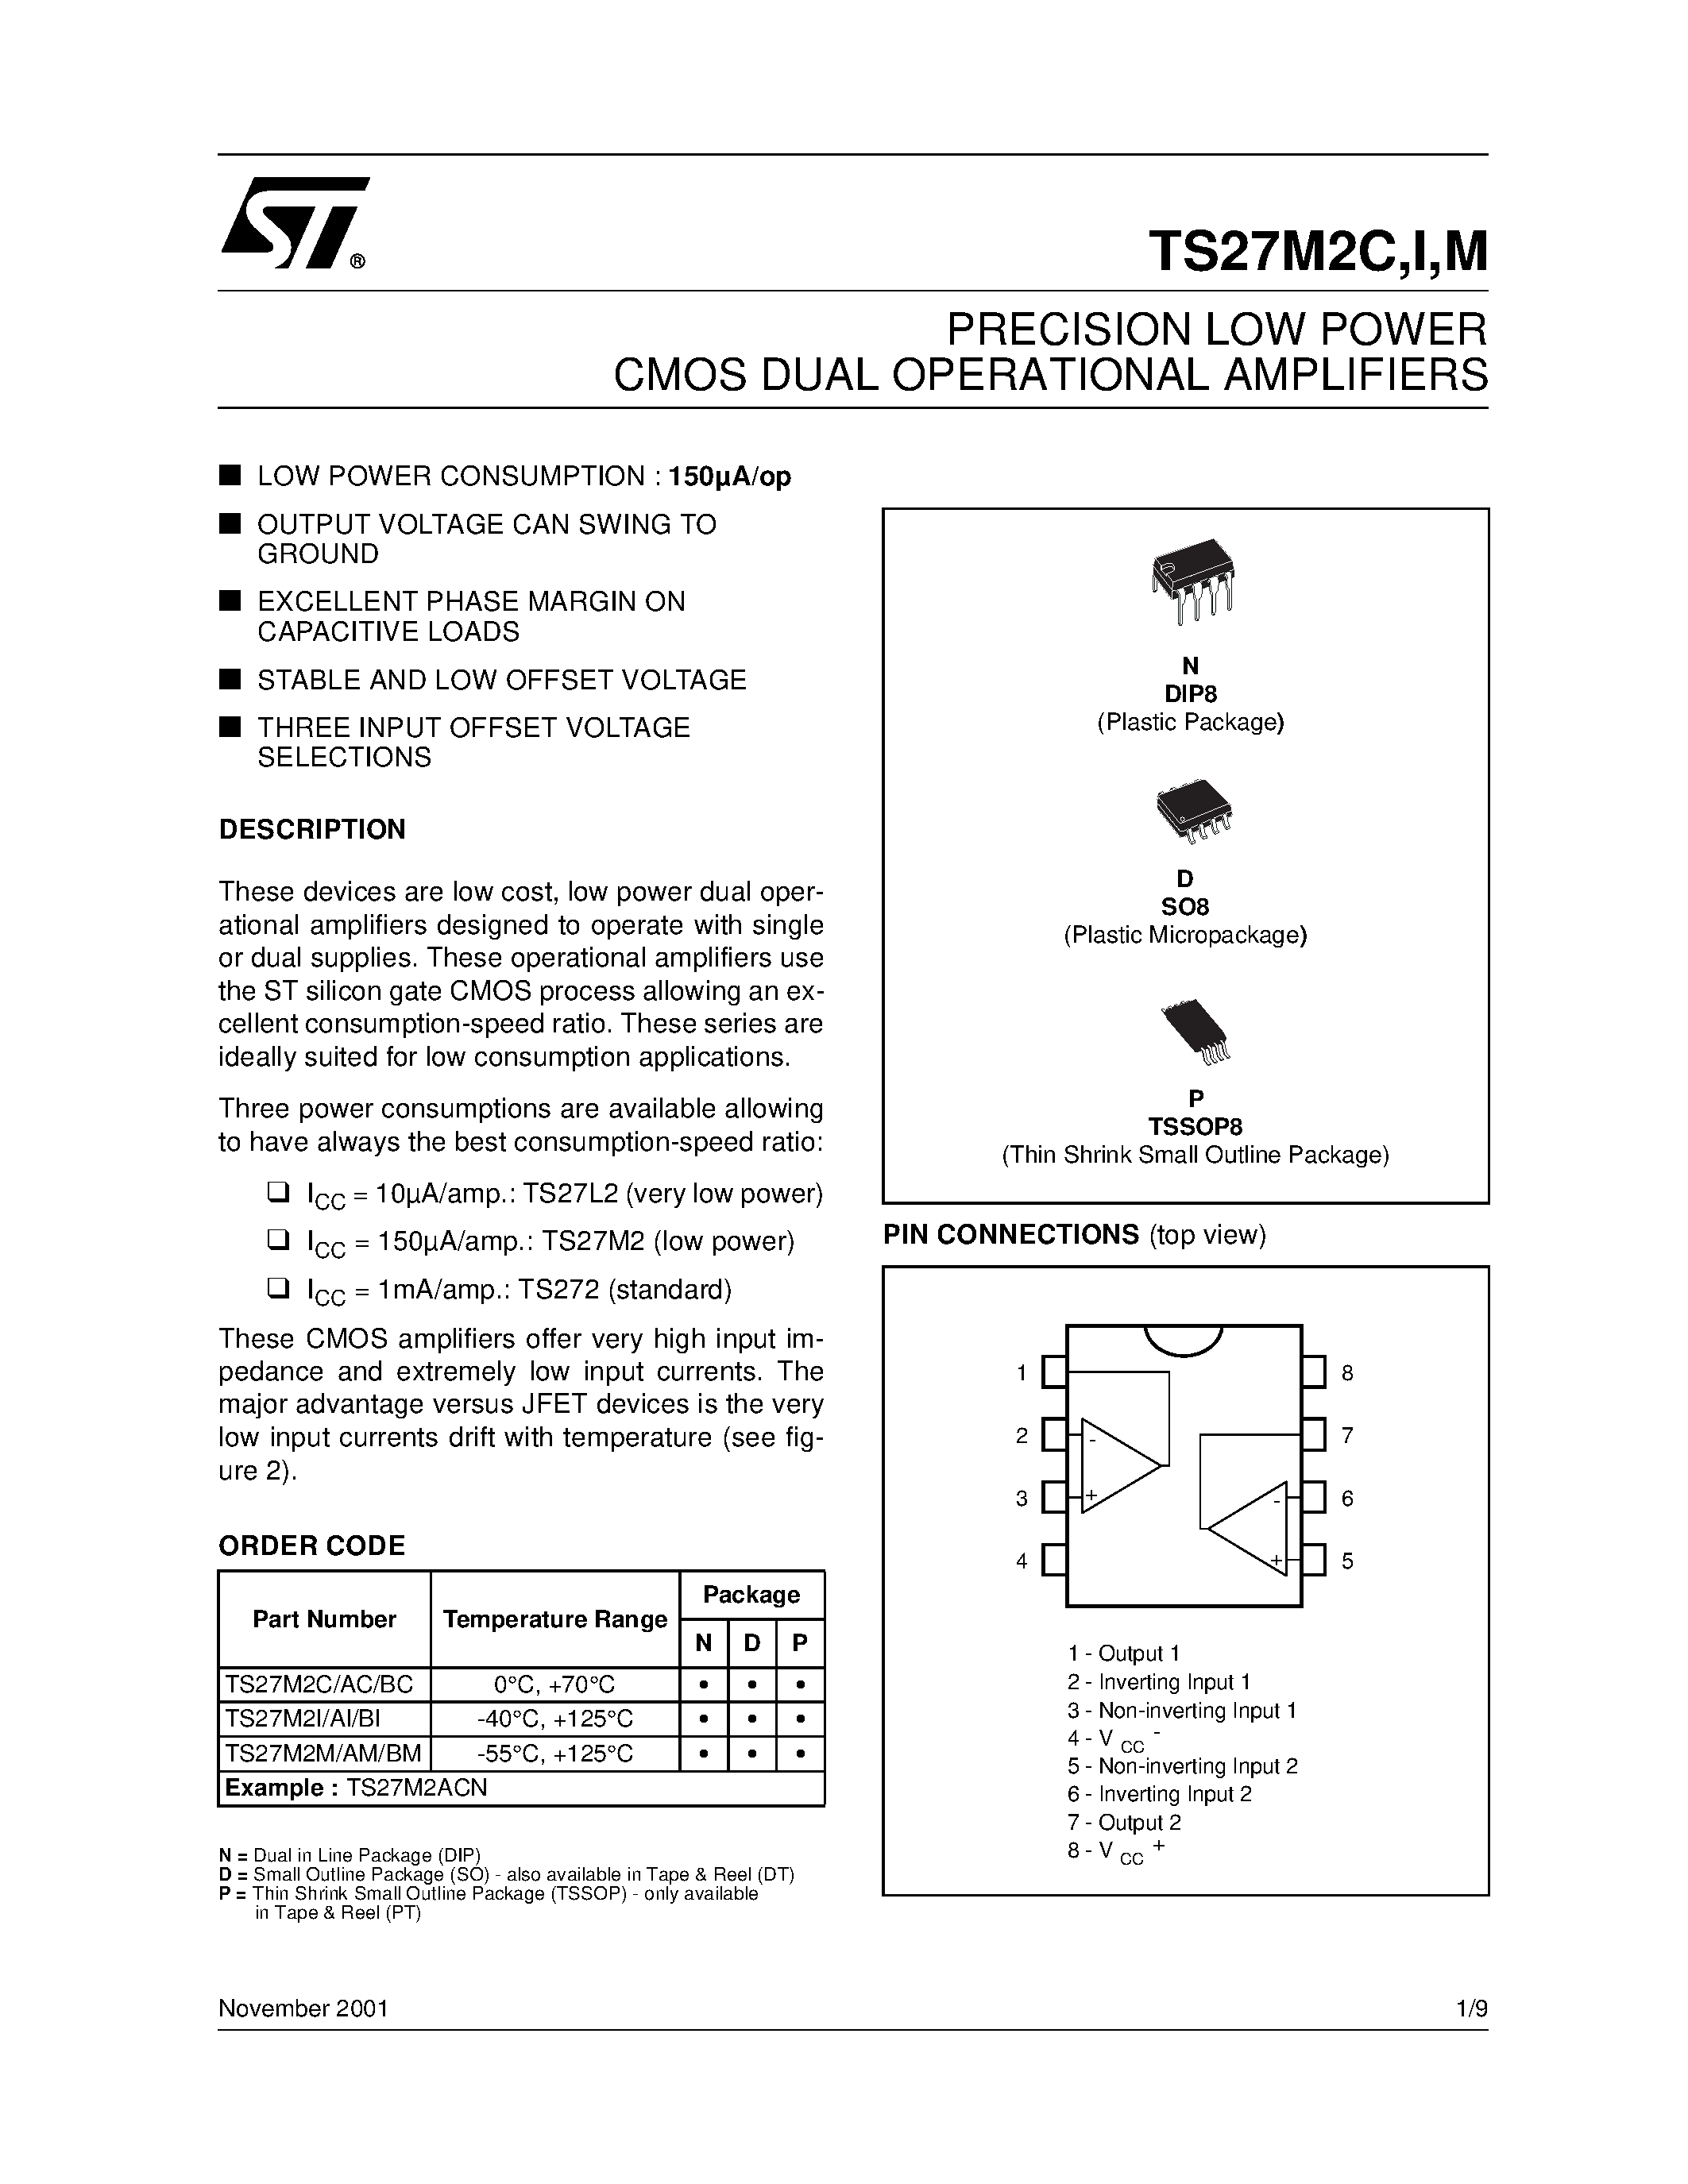 Datasheet TS27M2BC - PRECISION LOW POWER CMOS DUAL OPERATIONAL AMPLIFIERS page 1